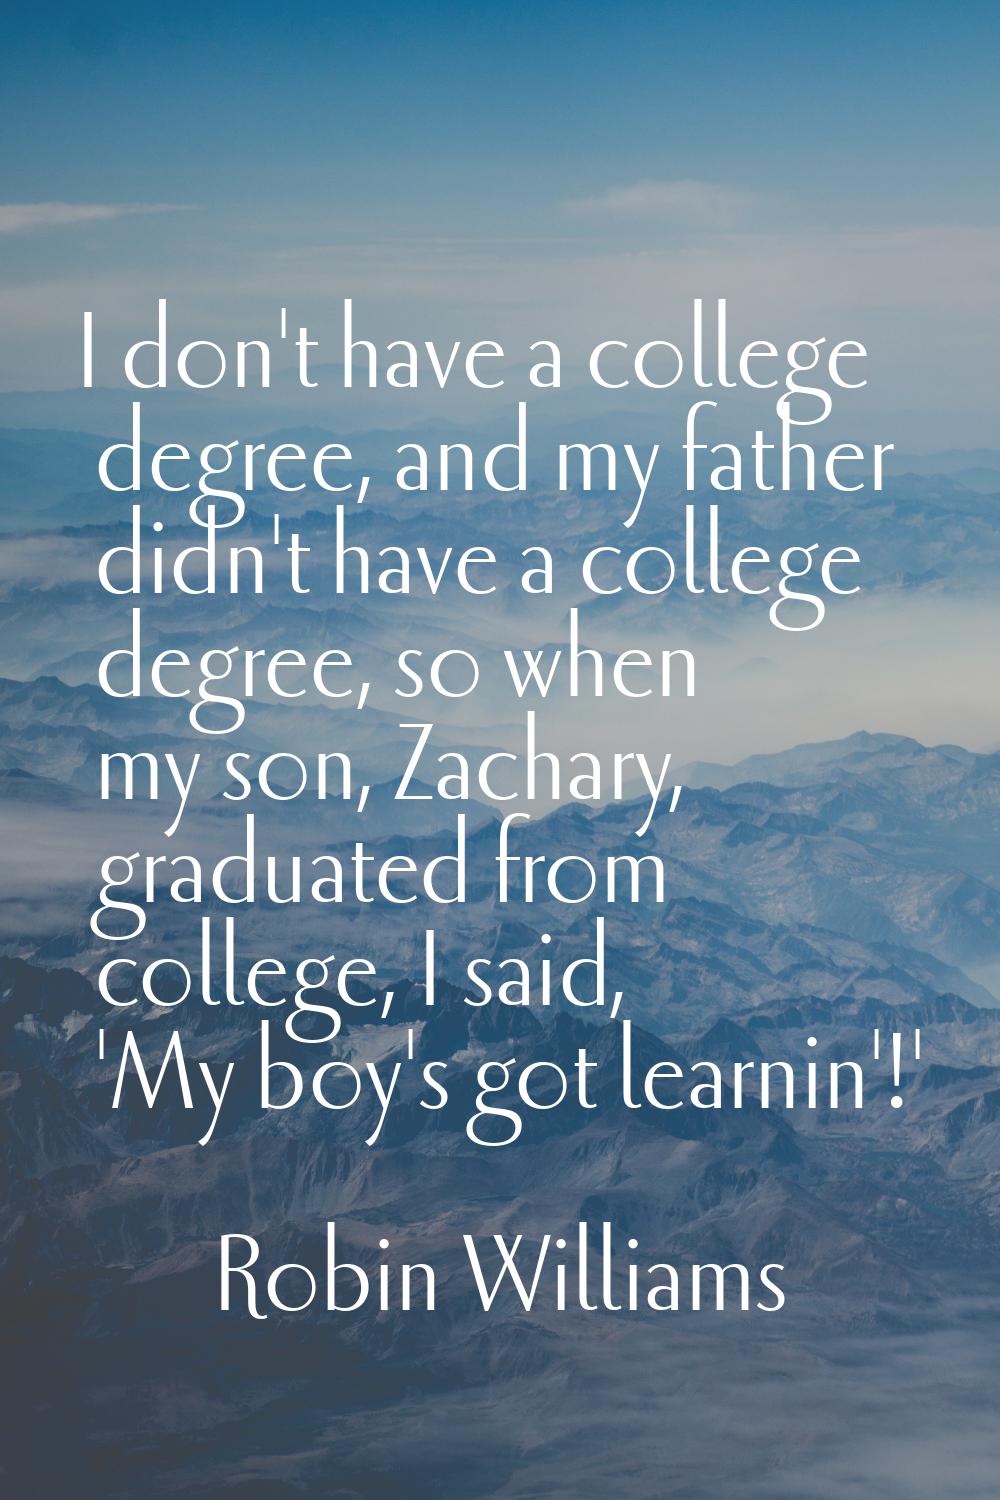 I don't have a college degree, and my father didn't have a college degree, so when my son, Zachary,